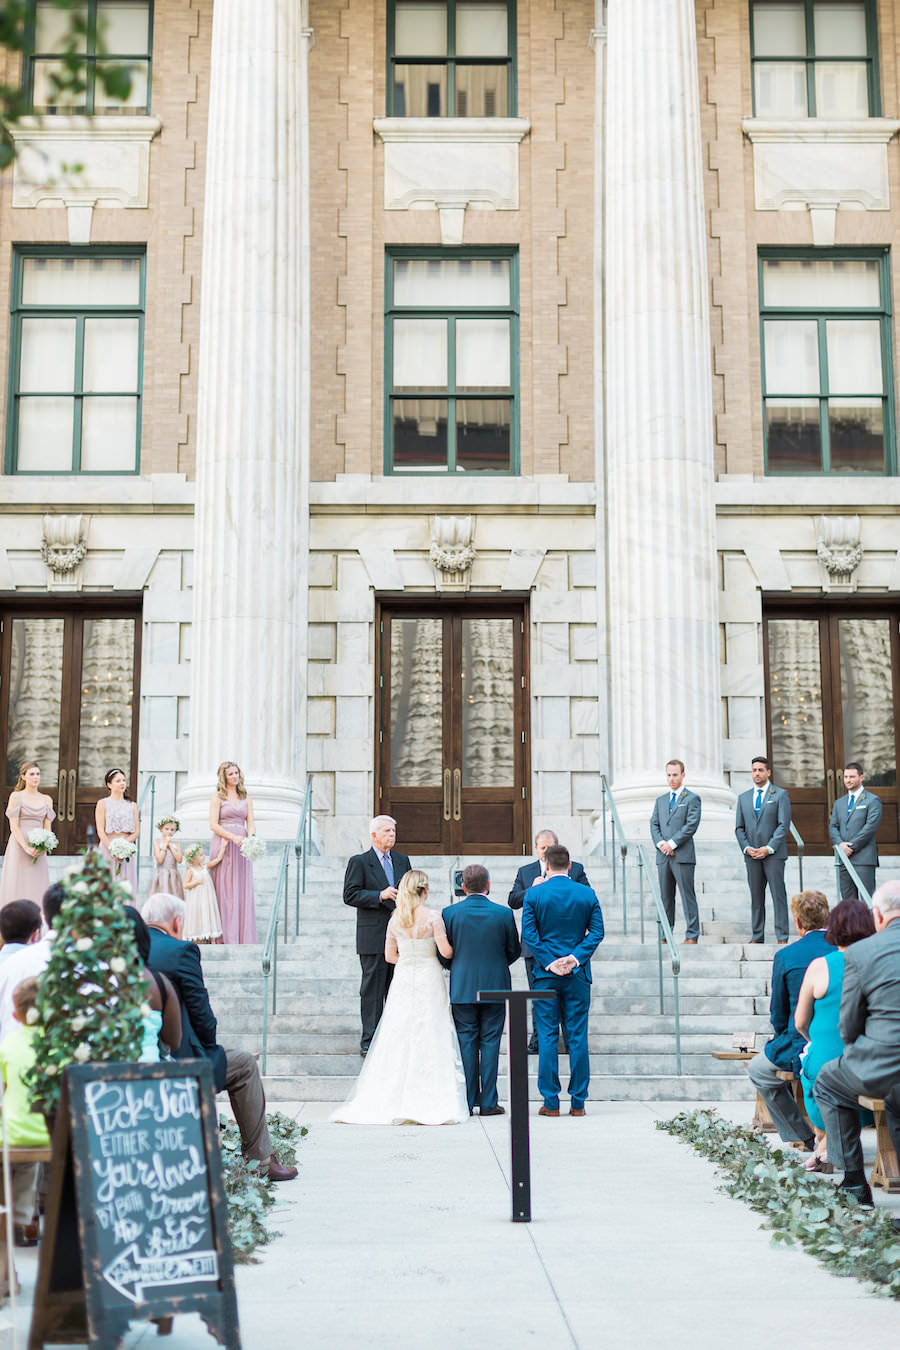 Bride and Groom Walking Down the Aisle Wedding Portrait | Downtown Tampa Wedding Planning Inspire Weddings and Events